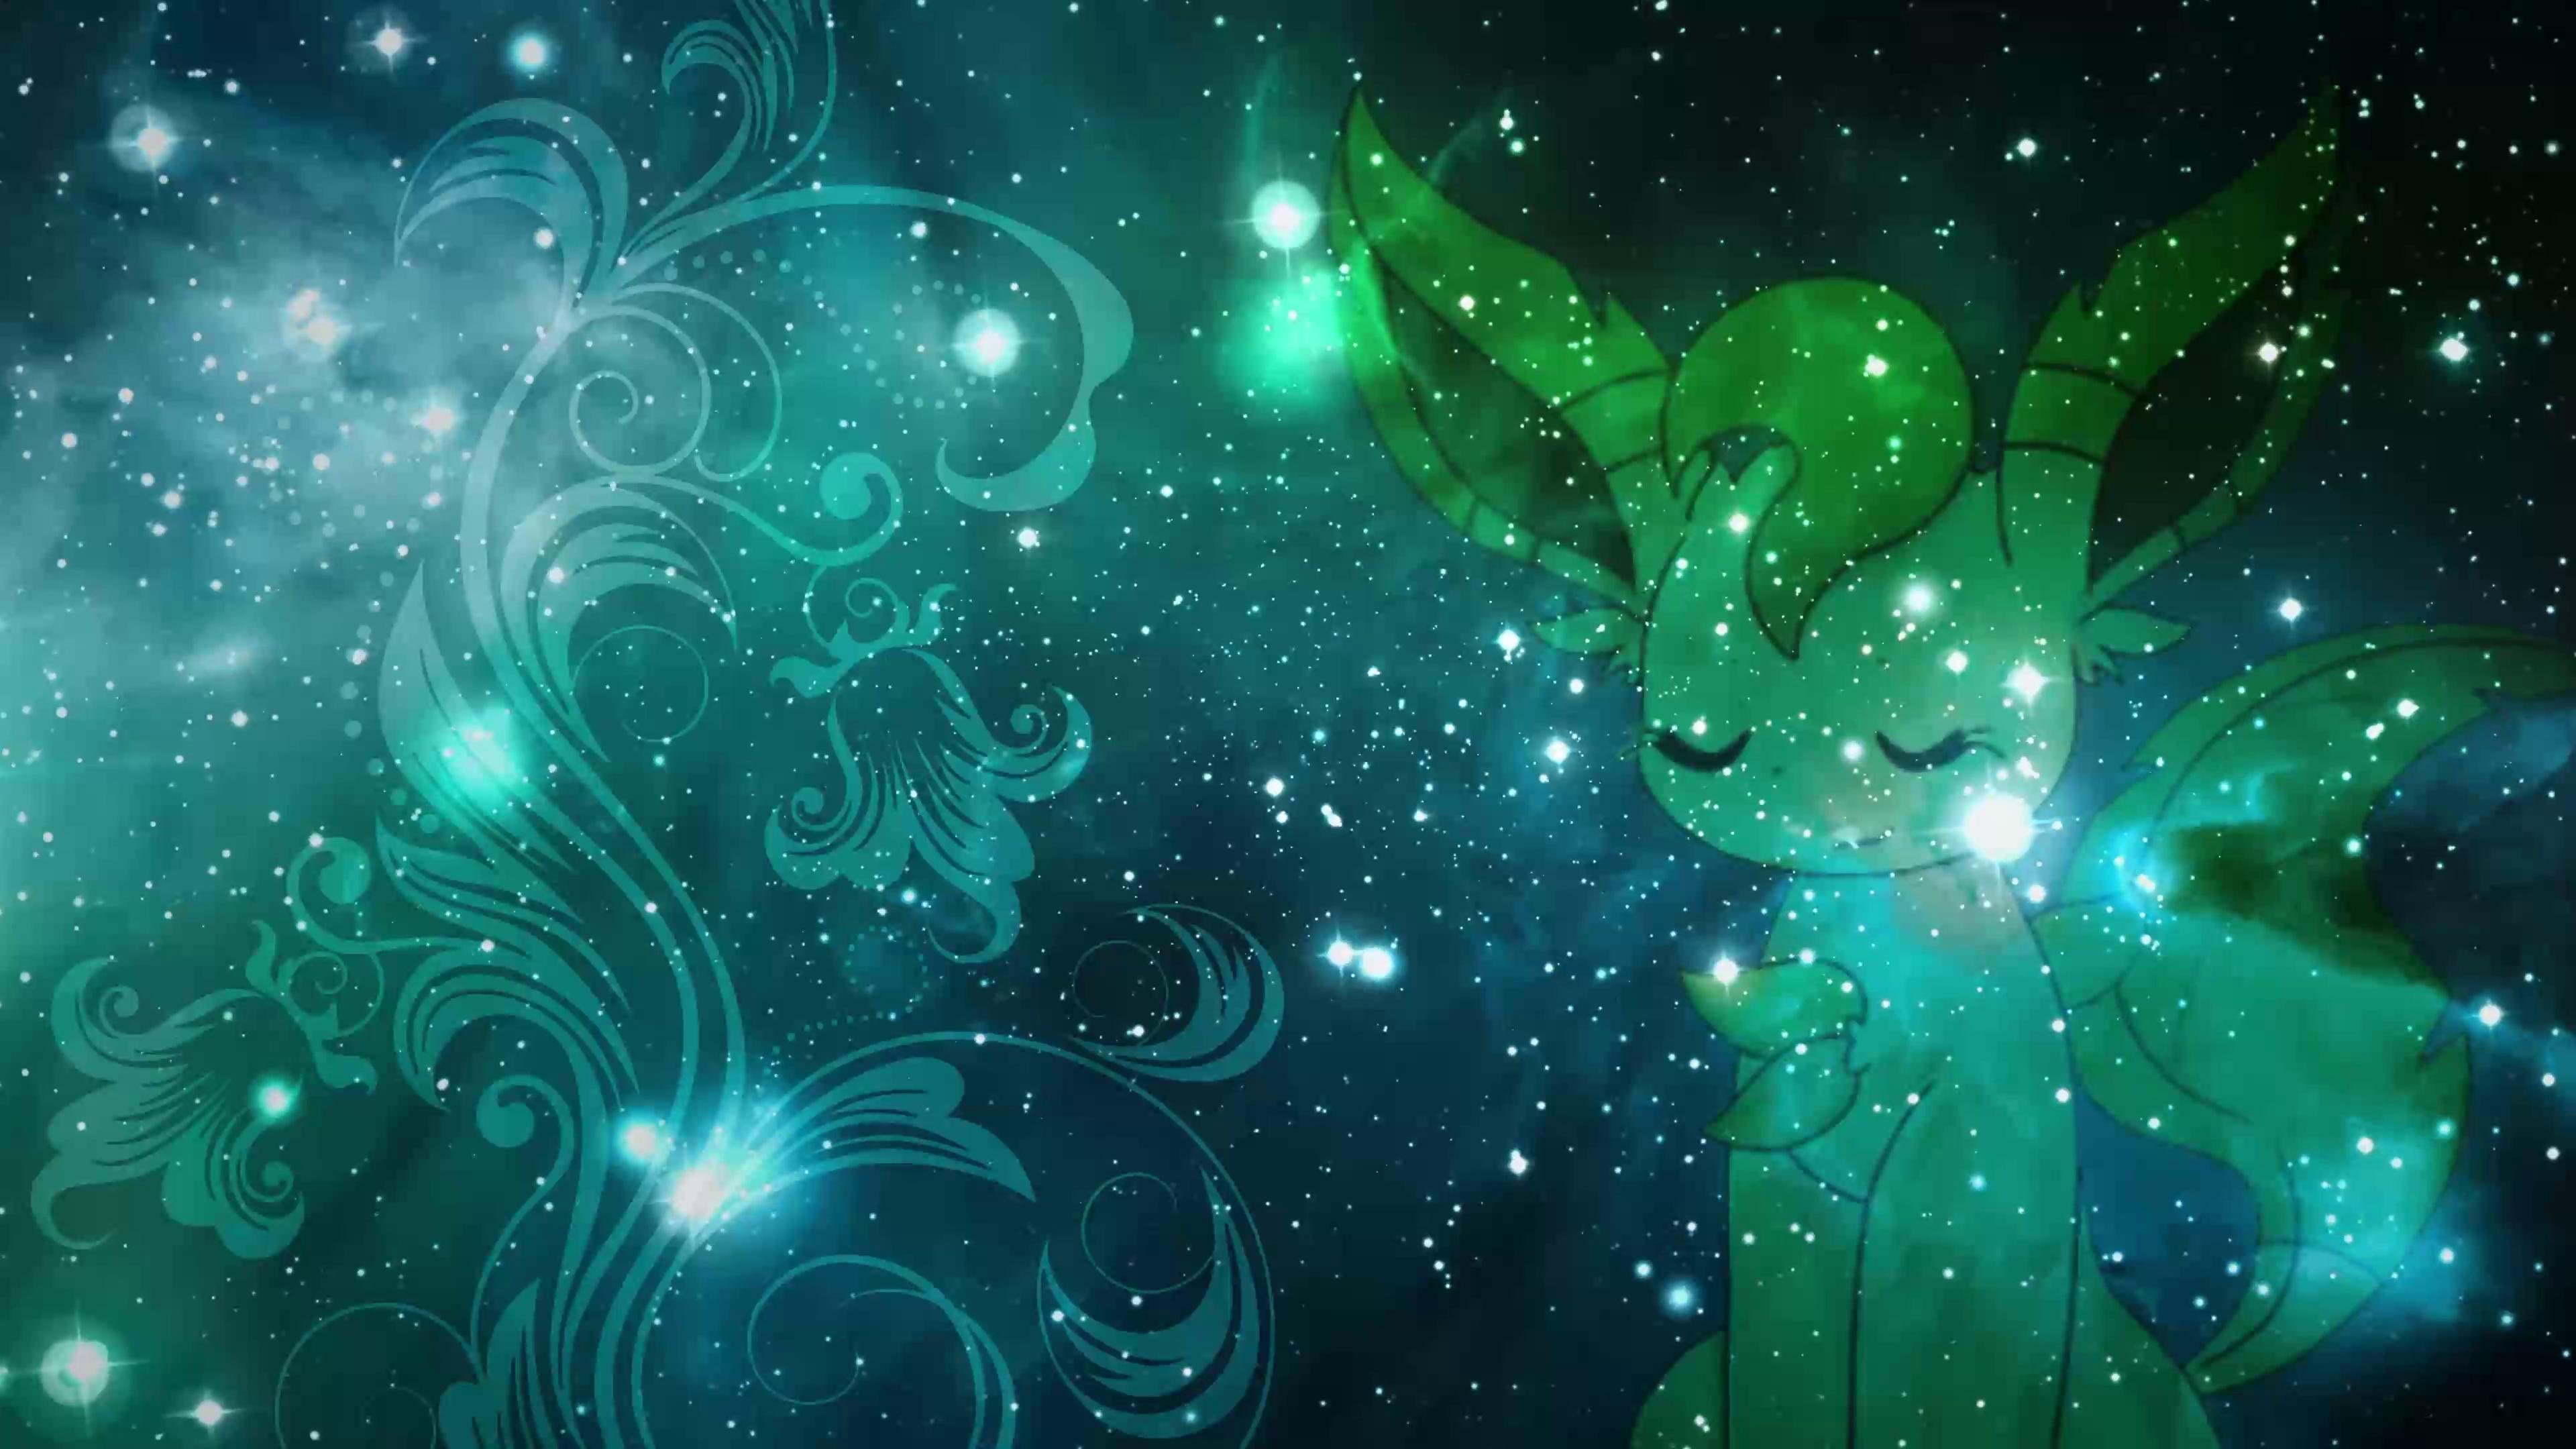 is there a version of this leafeon where there is only text i really want  this as my wallpaper  rPokemonTCG